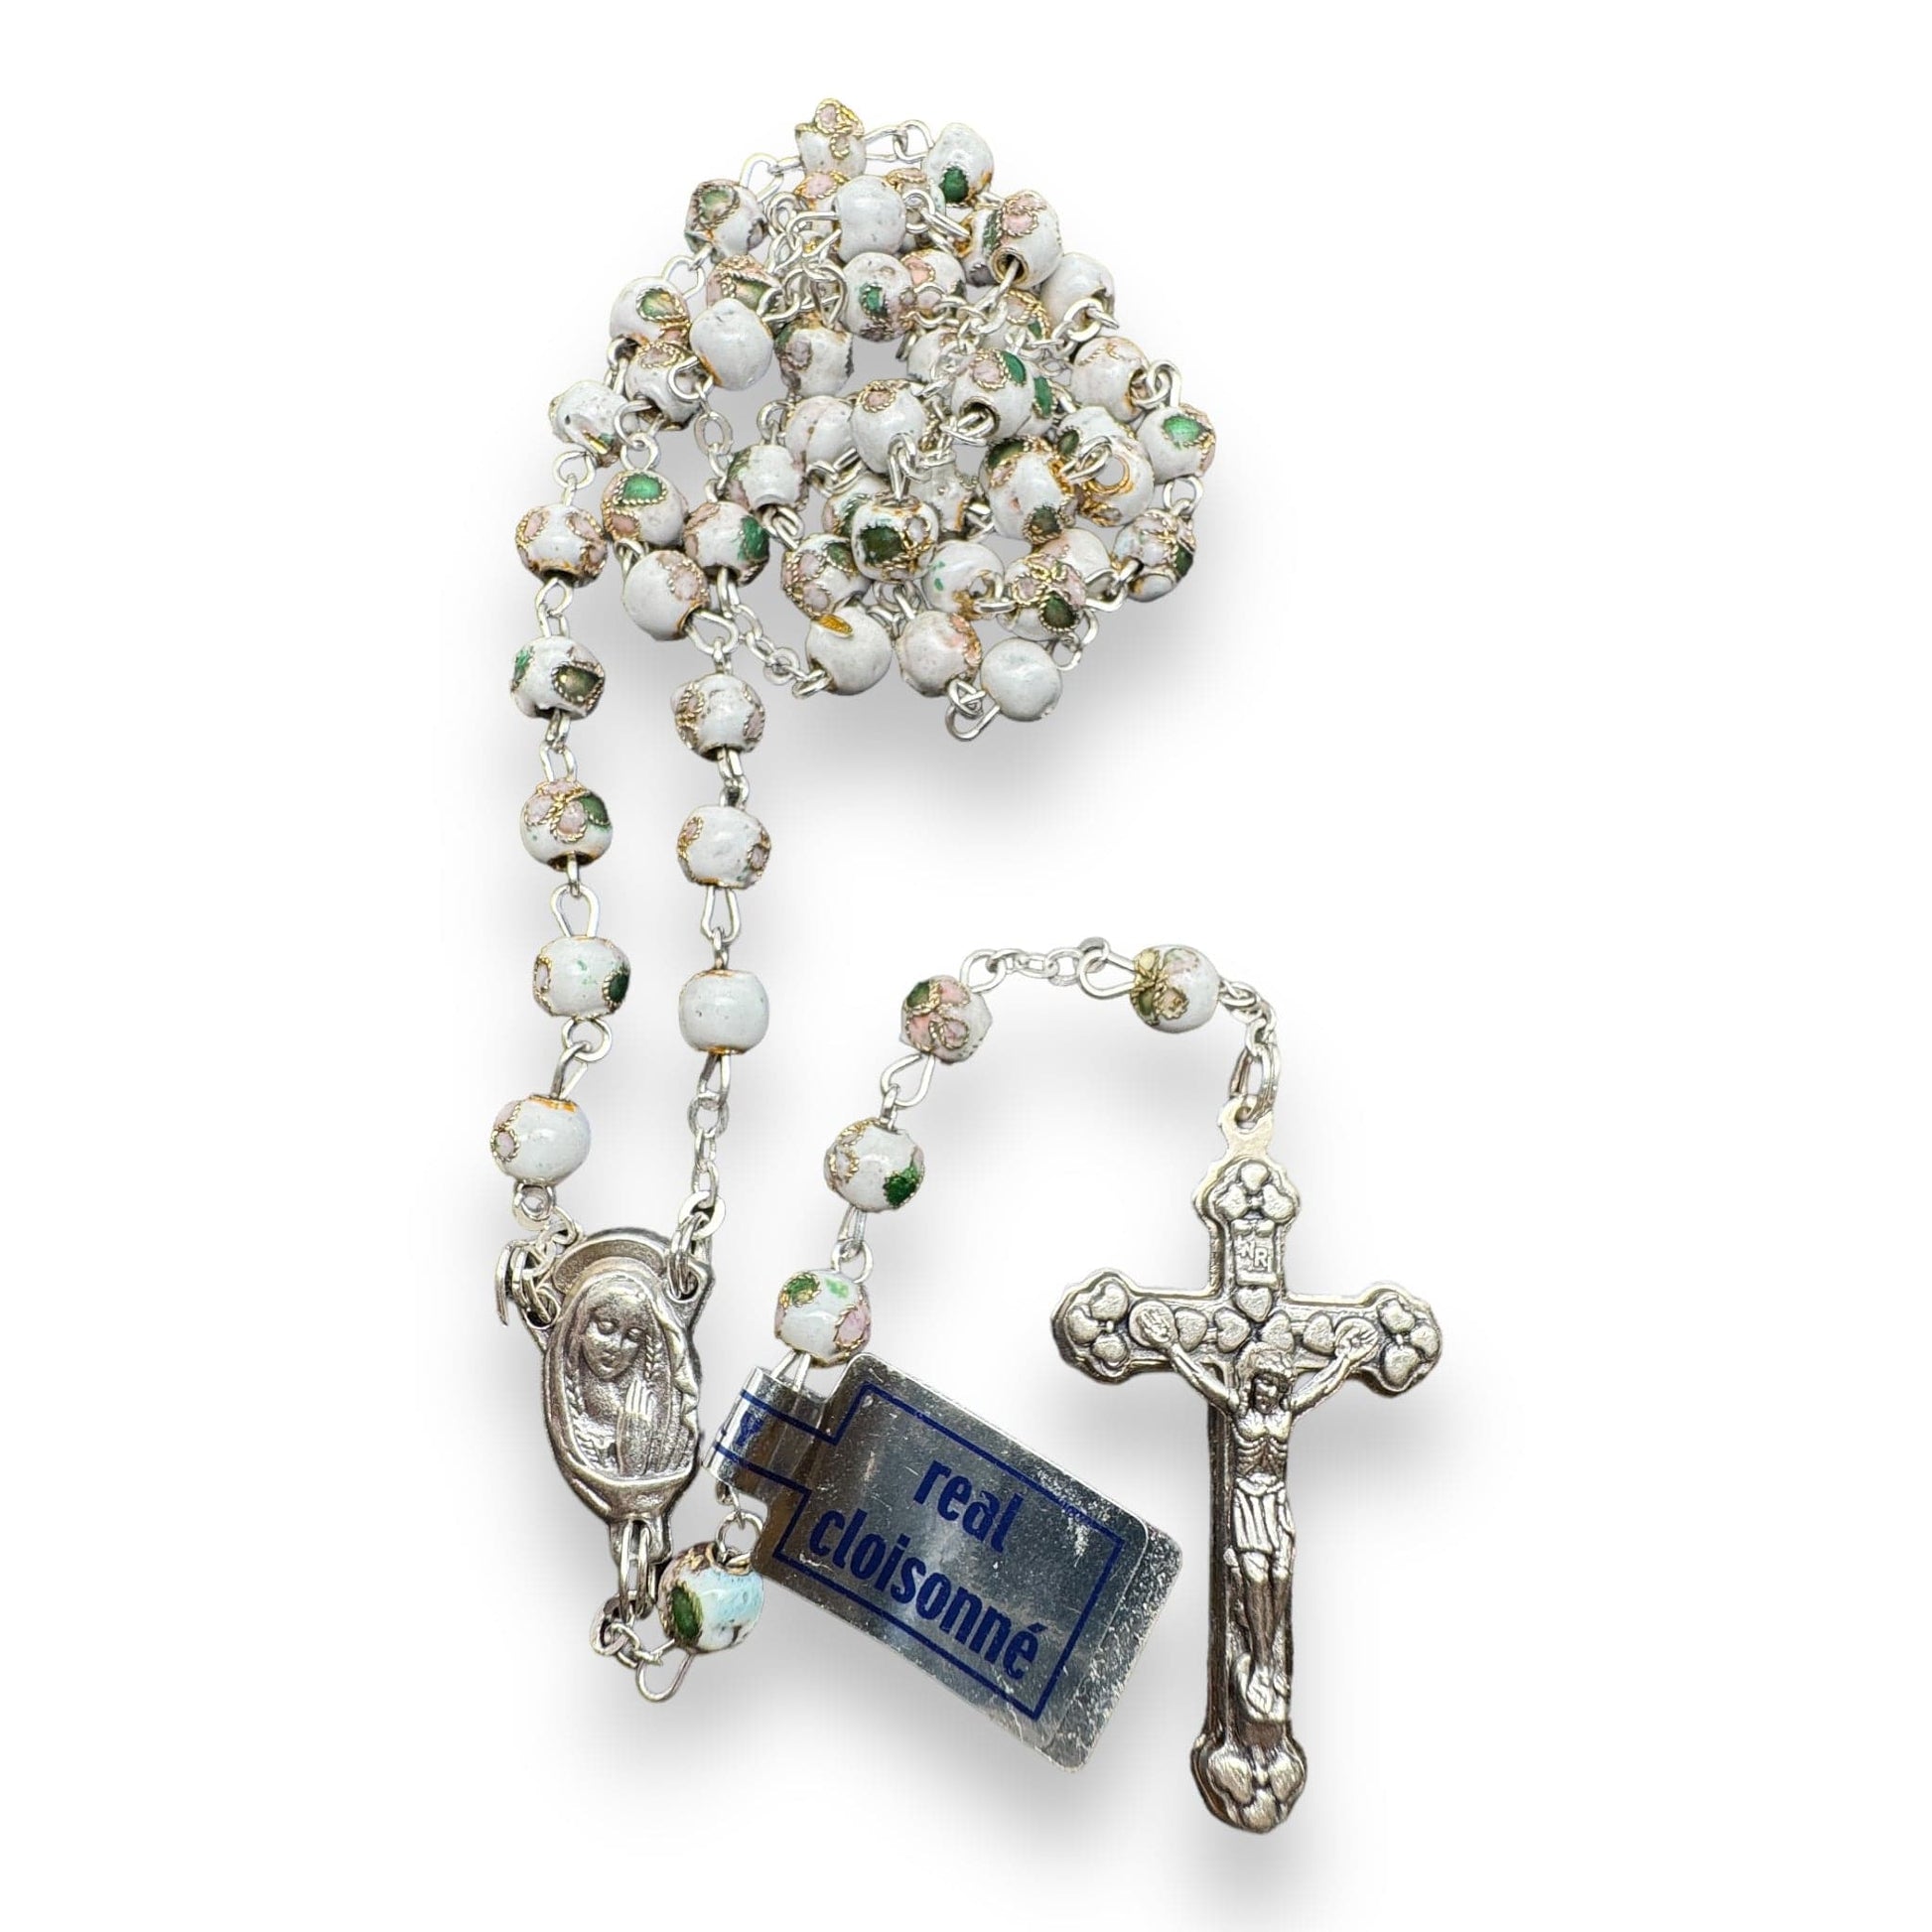 Catholically Rosaries White Cloisonne Rosary Small Beads - Catholic - Blessed By Pope  w/ Parchment